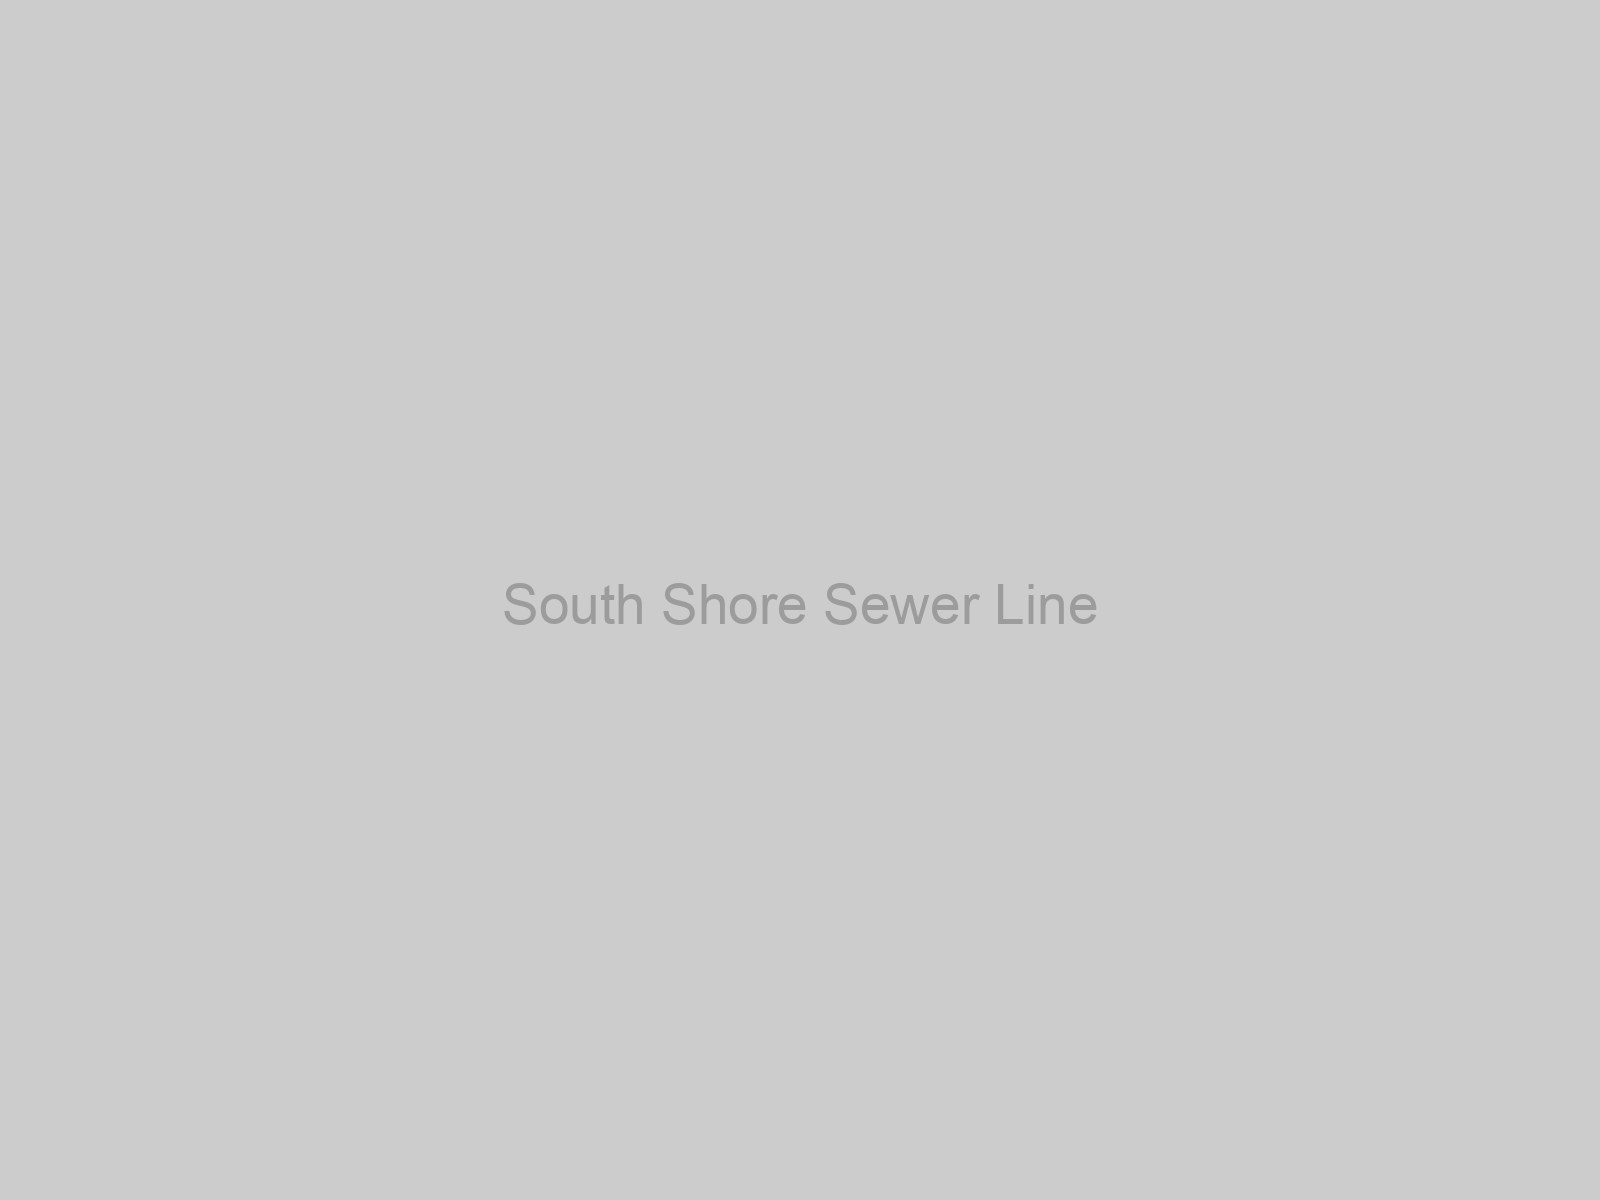 South Shore Sewer Line